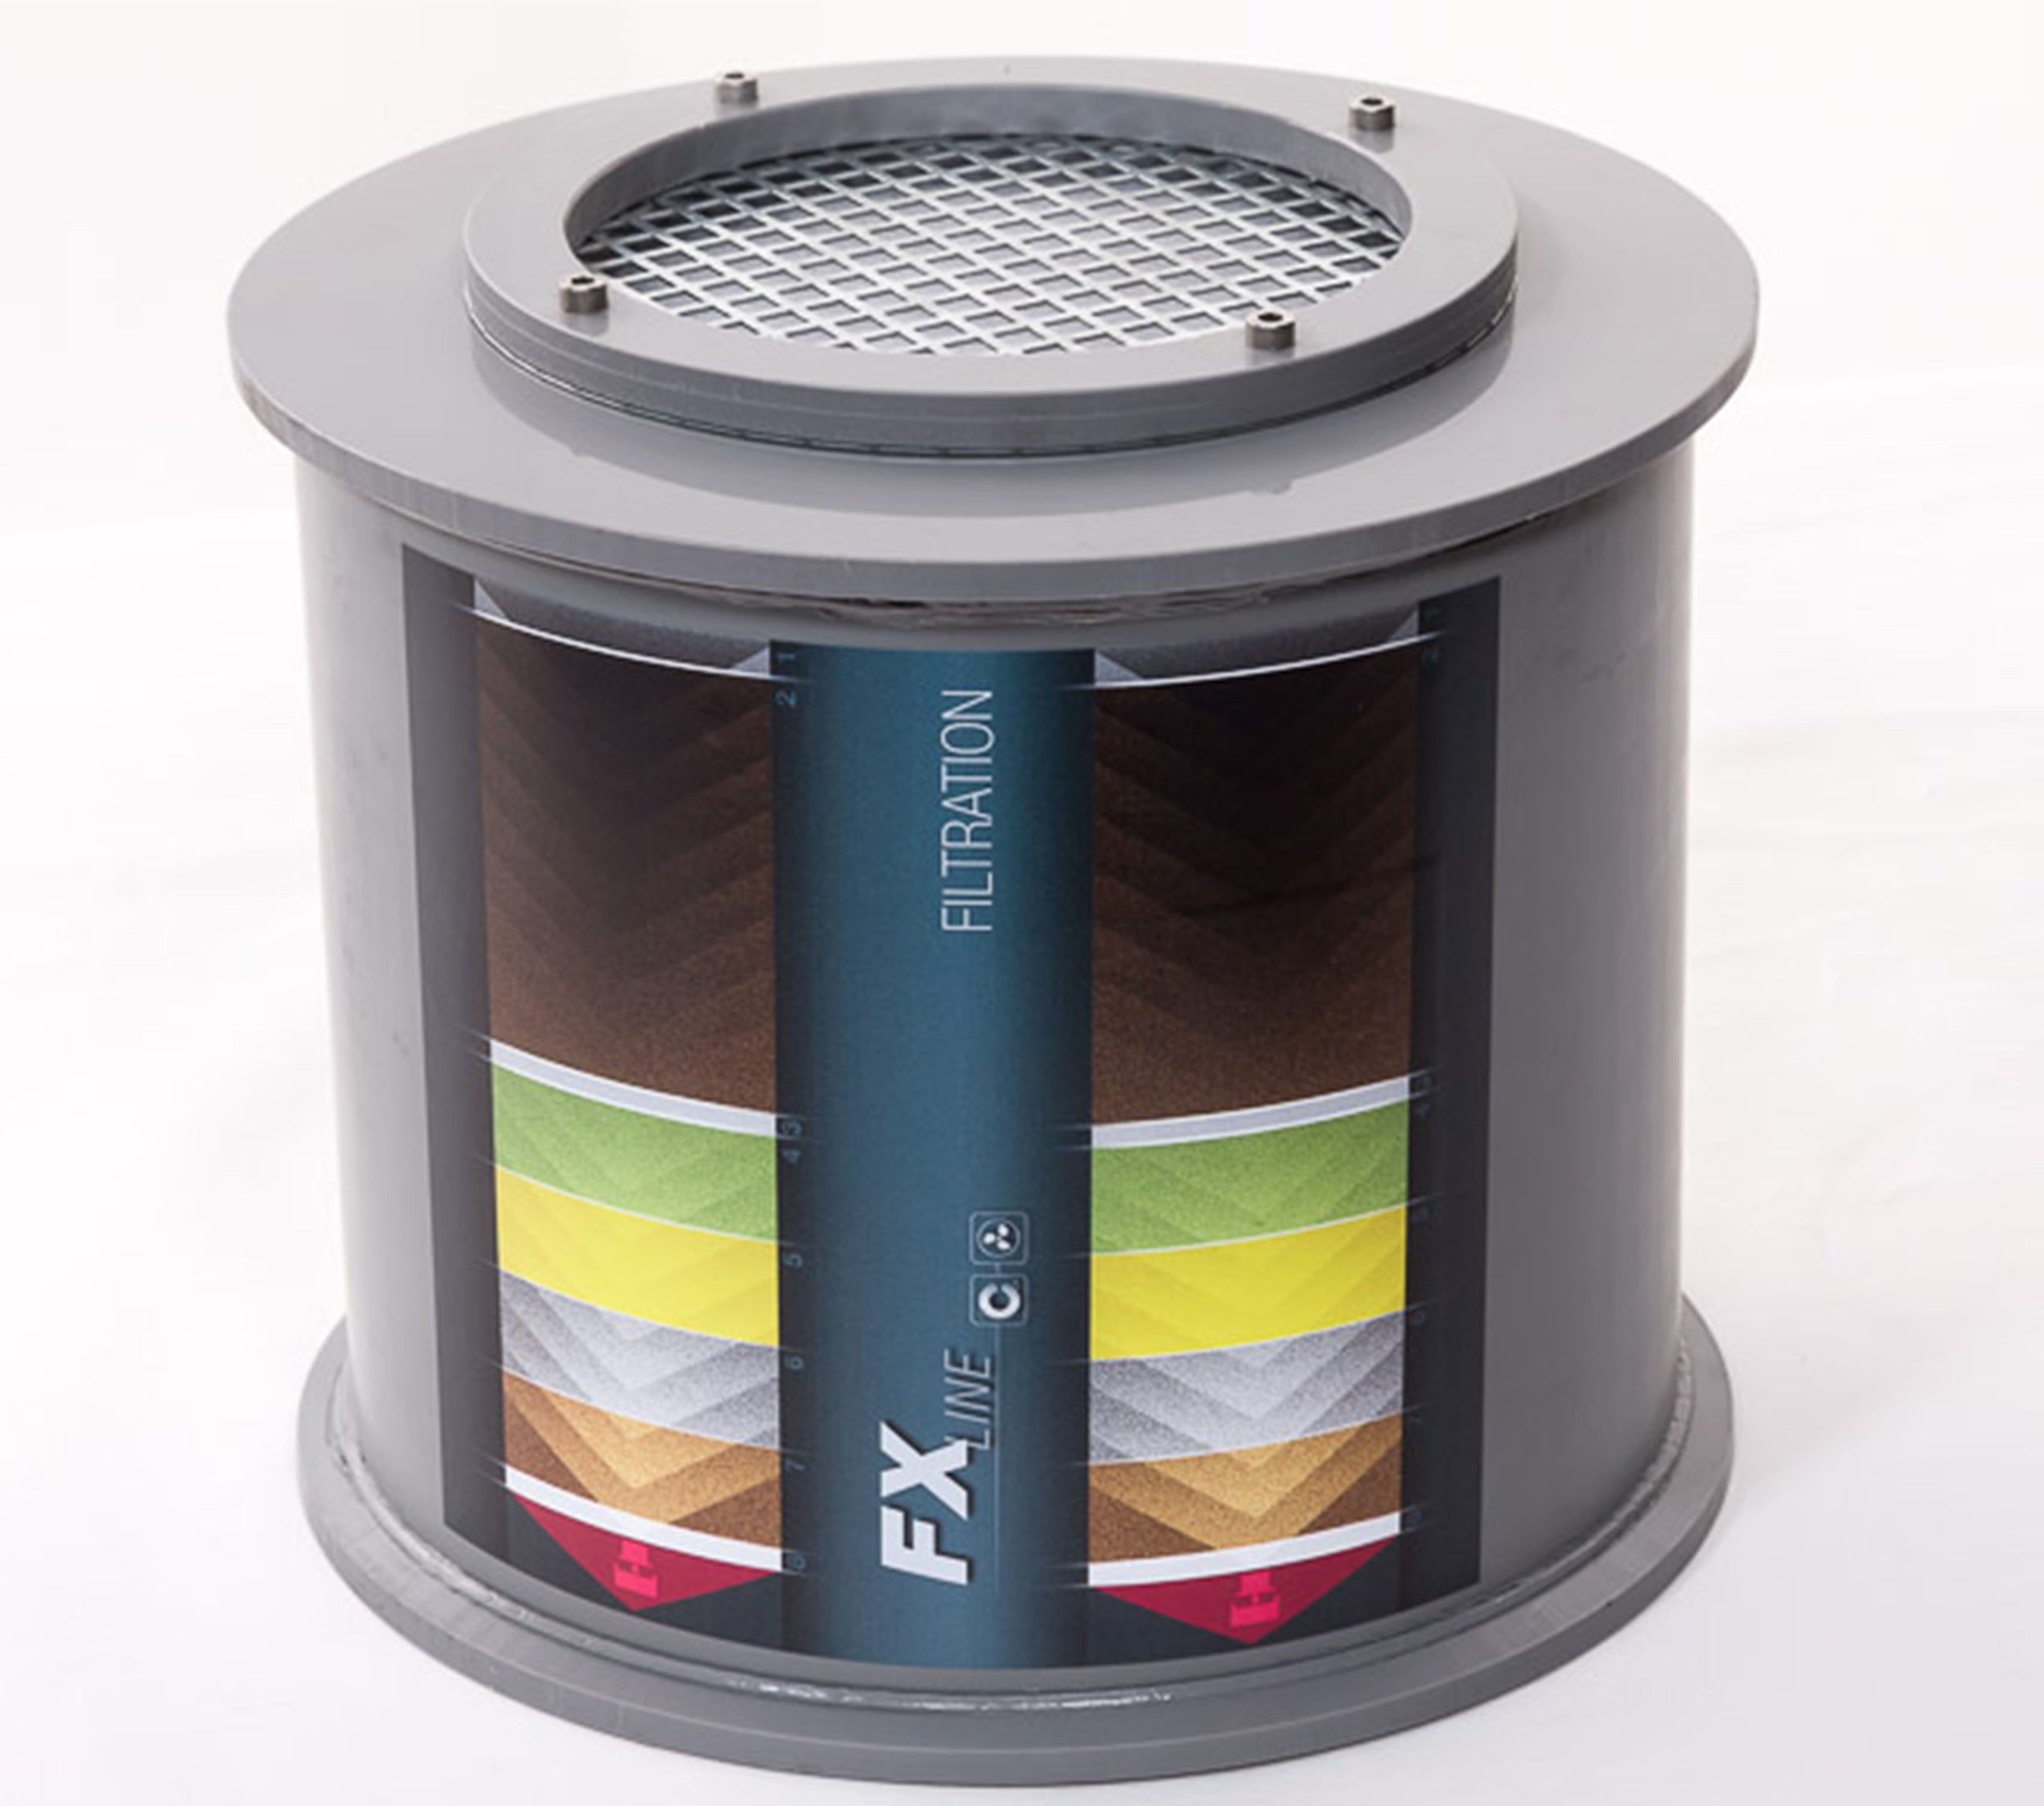 Activated carbon replacement filter for model(s): FX90 with width 900/1200 mm, activated carbon